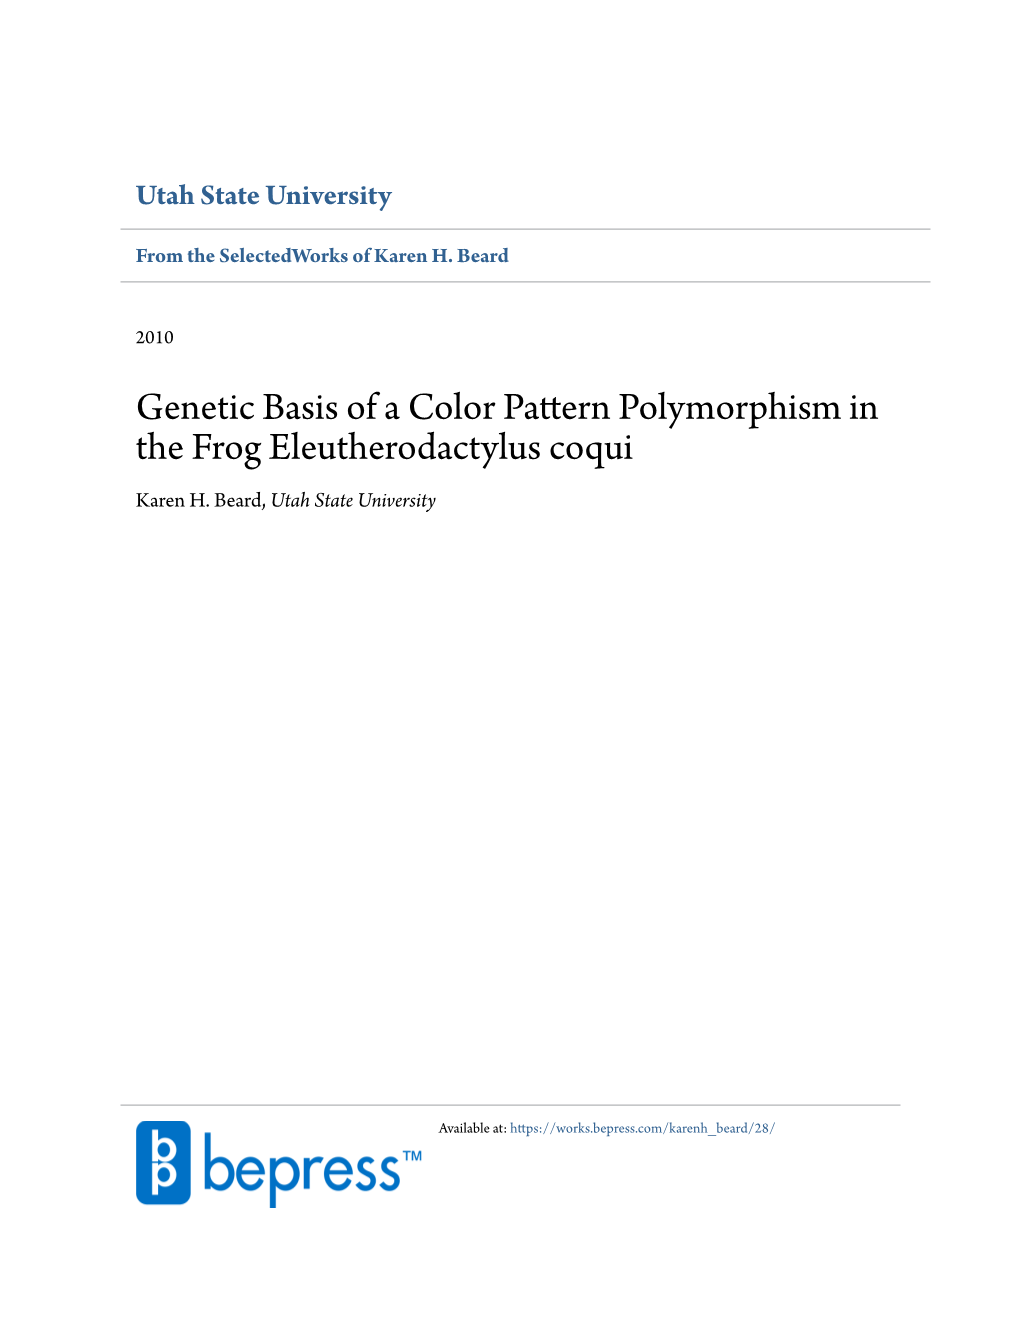 Genetic Basis of a Color Pattern Polymorphism in the Frog Eleutherodactylus Coqui Karen H